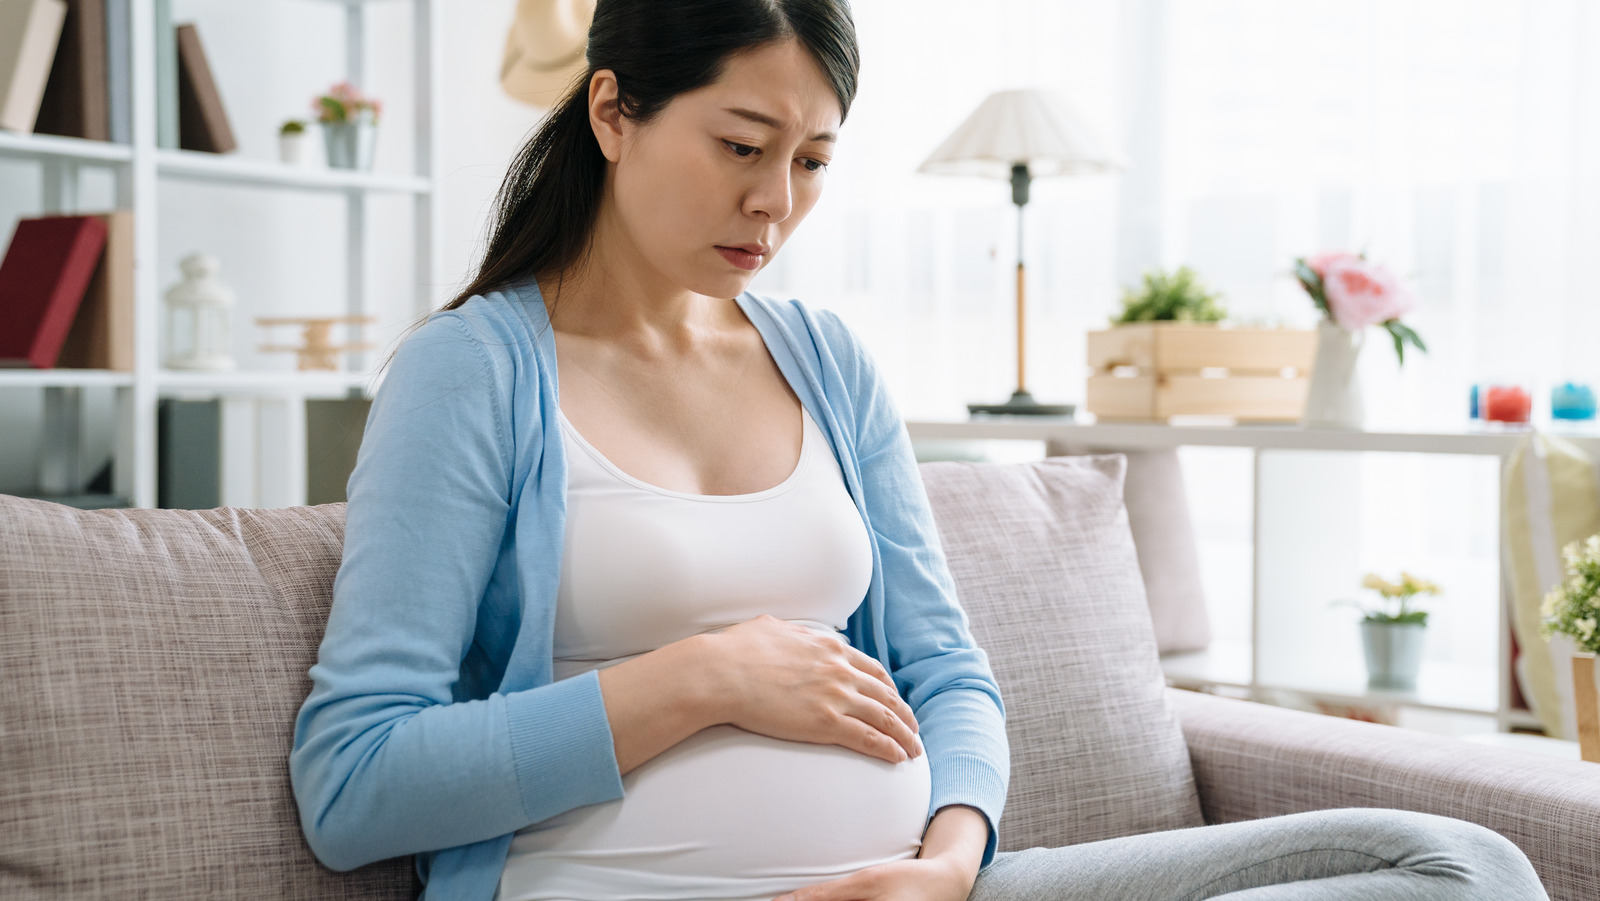 Why Are American Women More Likely To Die From Preventable Pregnancy Complications